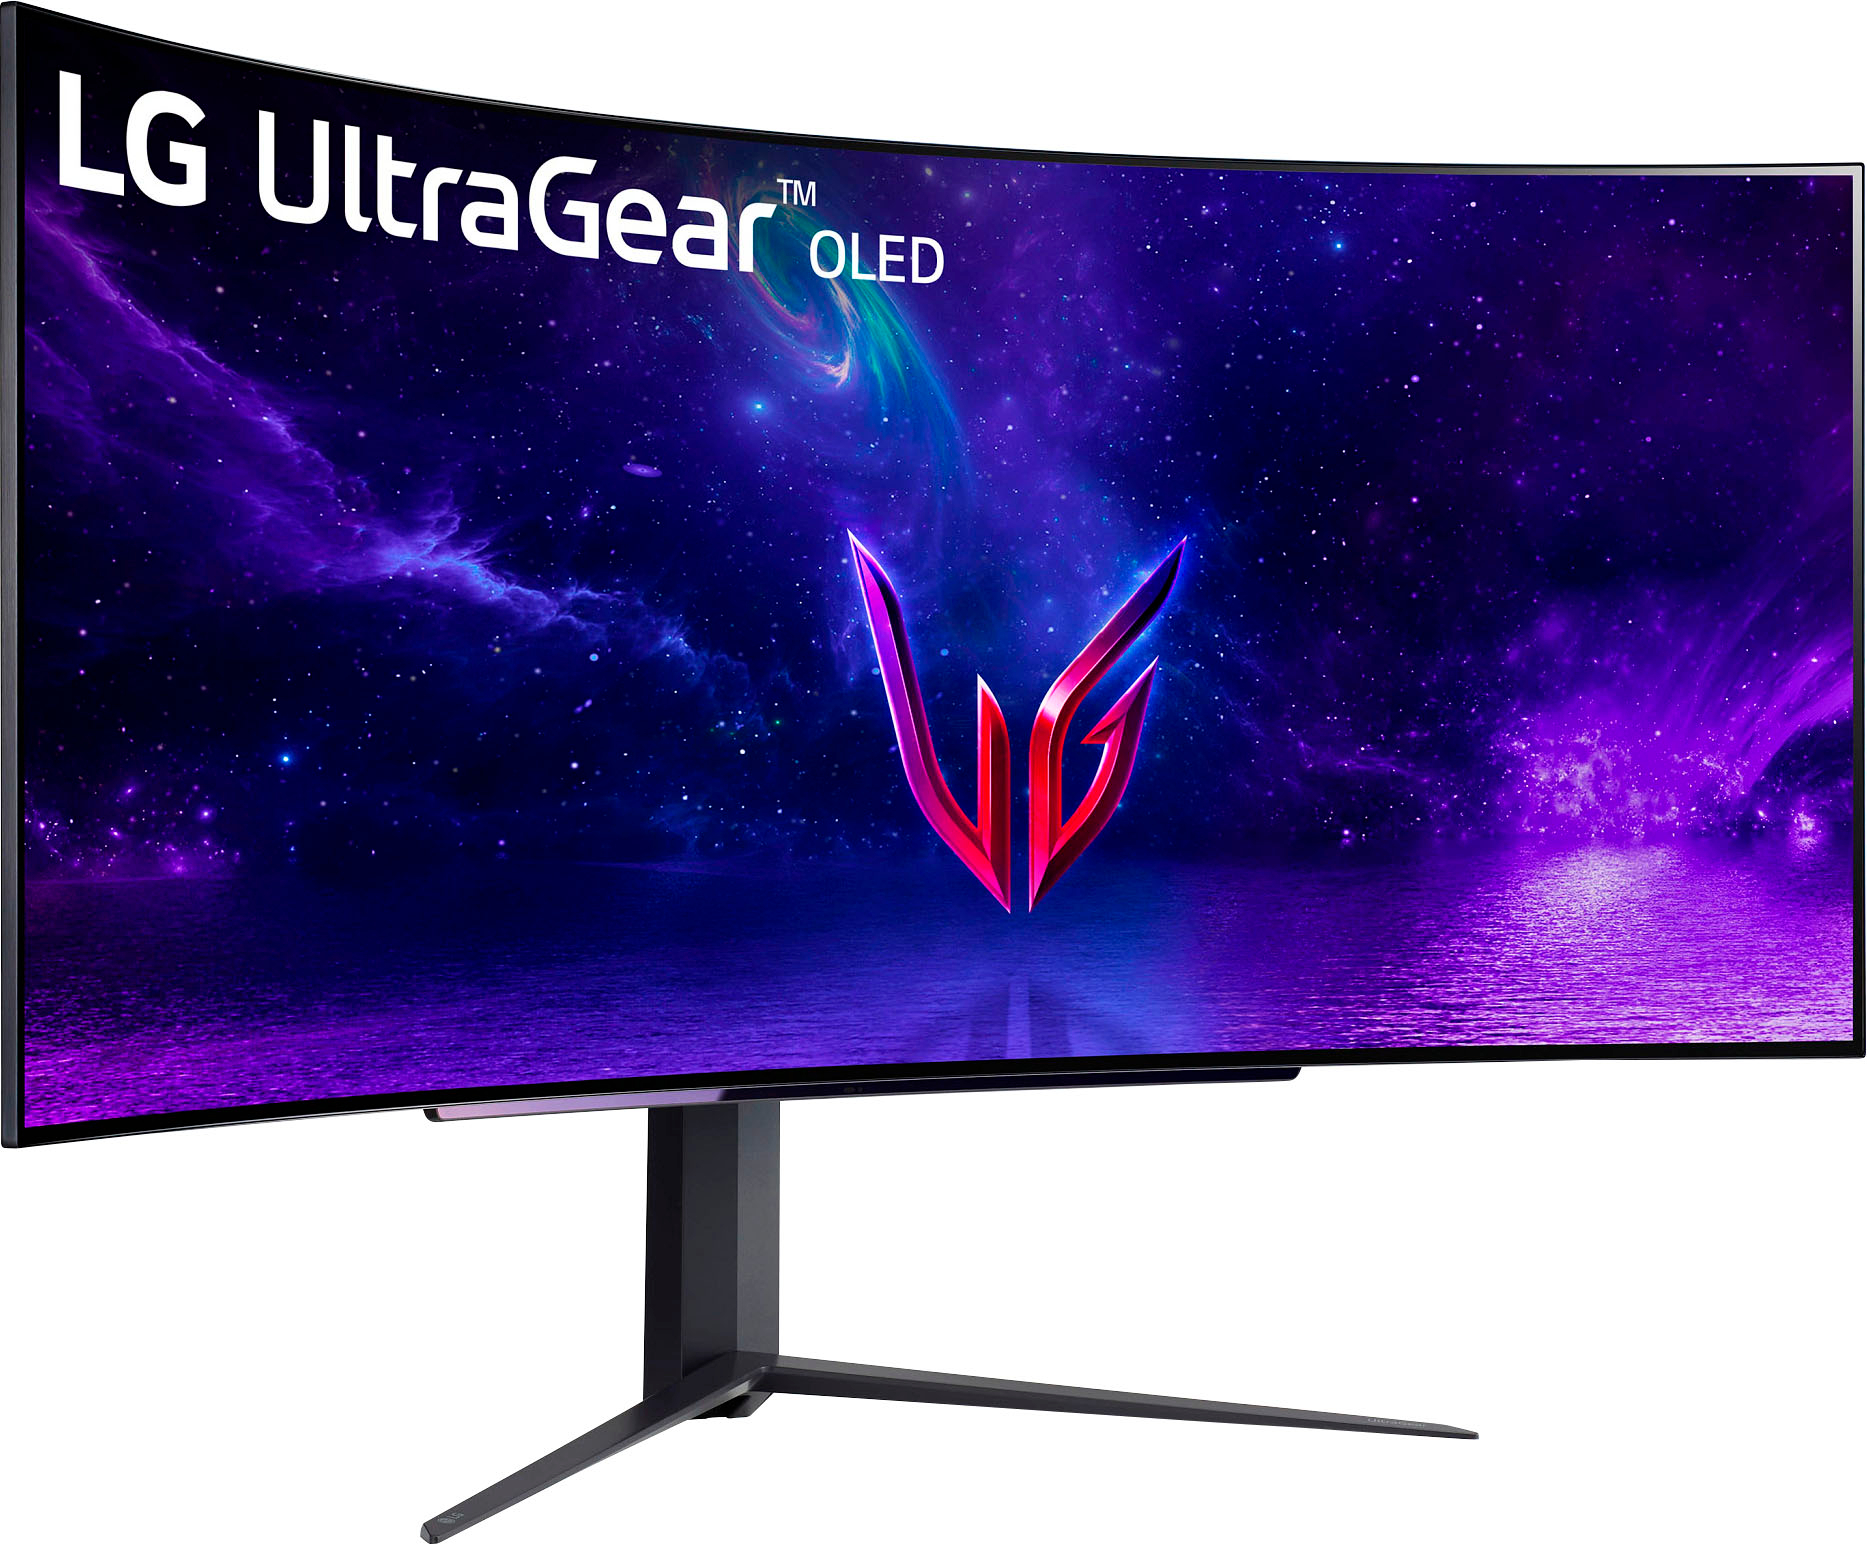 Angle View: LG - UltraGear 45” OLED Curved WQHD 240Hz 0.03ms FreeSync and NVIDIA G-Sync Compatible Gaming Monitor with HDR10 - Black